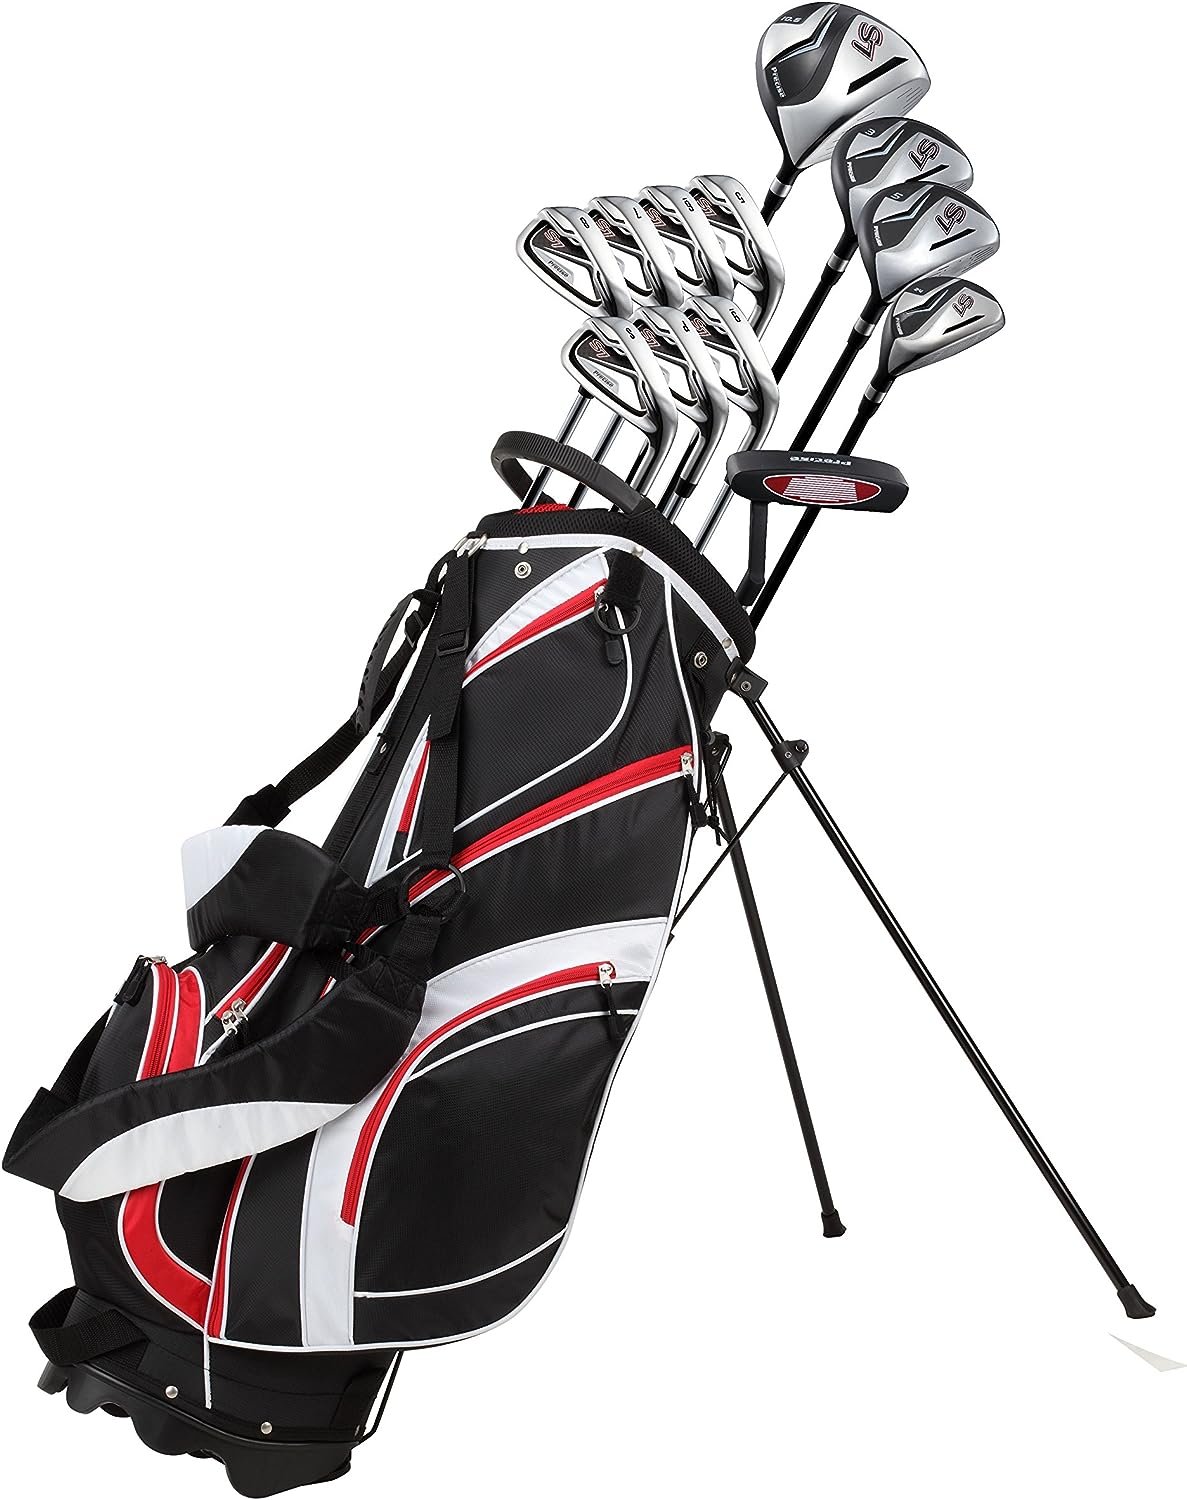 Precise Mens Right Handed Complete Golf Club Set, Superlite Graphite Shafts for Woods and True Temper Steel Shafts for Irons, Bonus Sand Wedge, Plus More, Black/Red, (78000-Red-MRH)